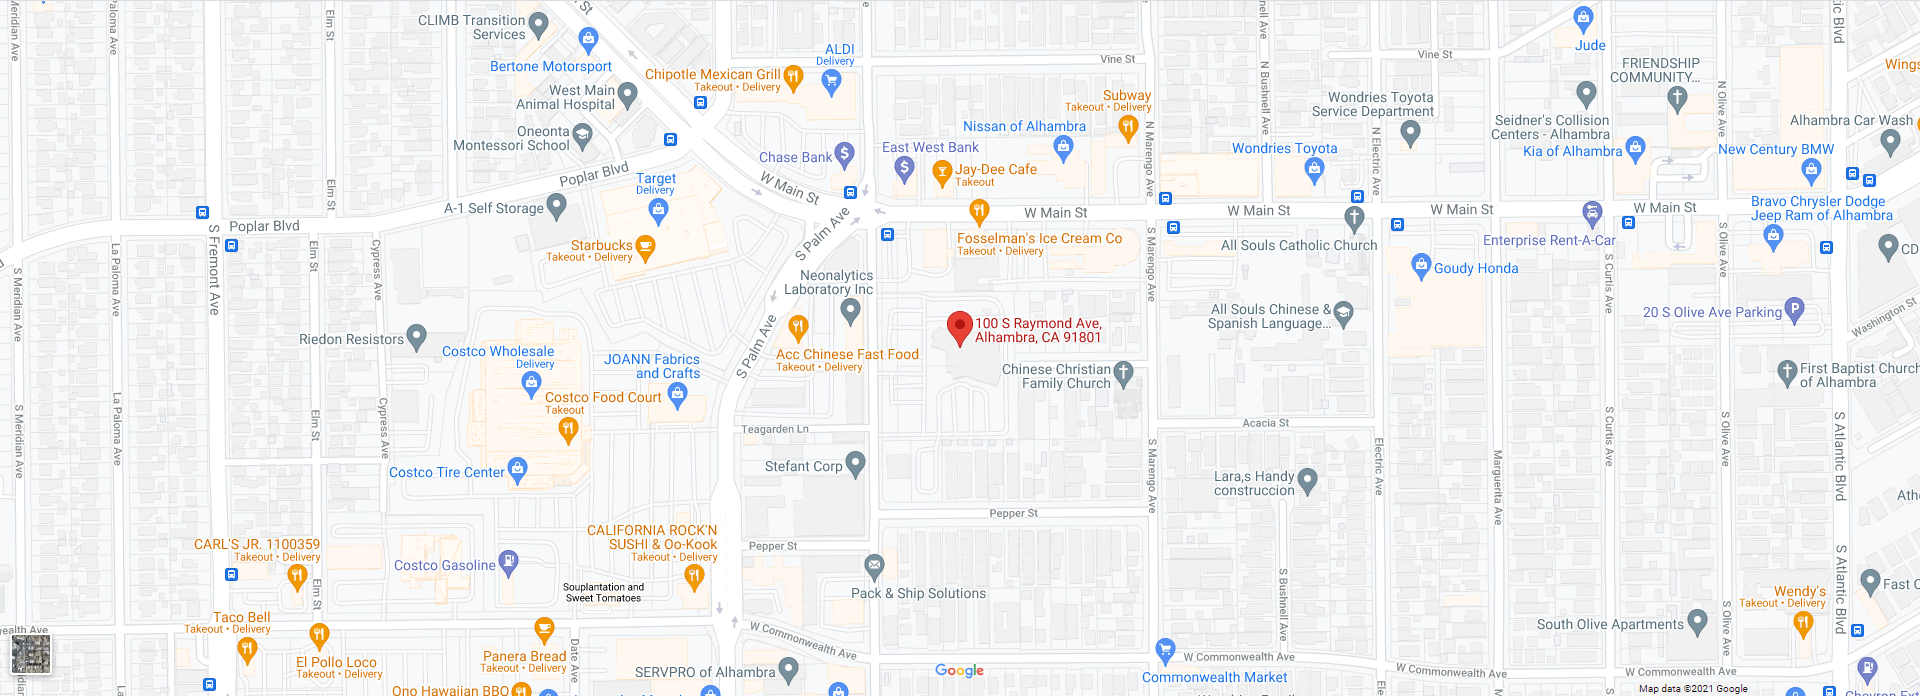 Banner picture of google map showing the drop pin location for Alhambra Hospital Medical Center.

100 S. Raymond Ave,
Alhambra, CA 91801